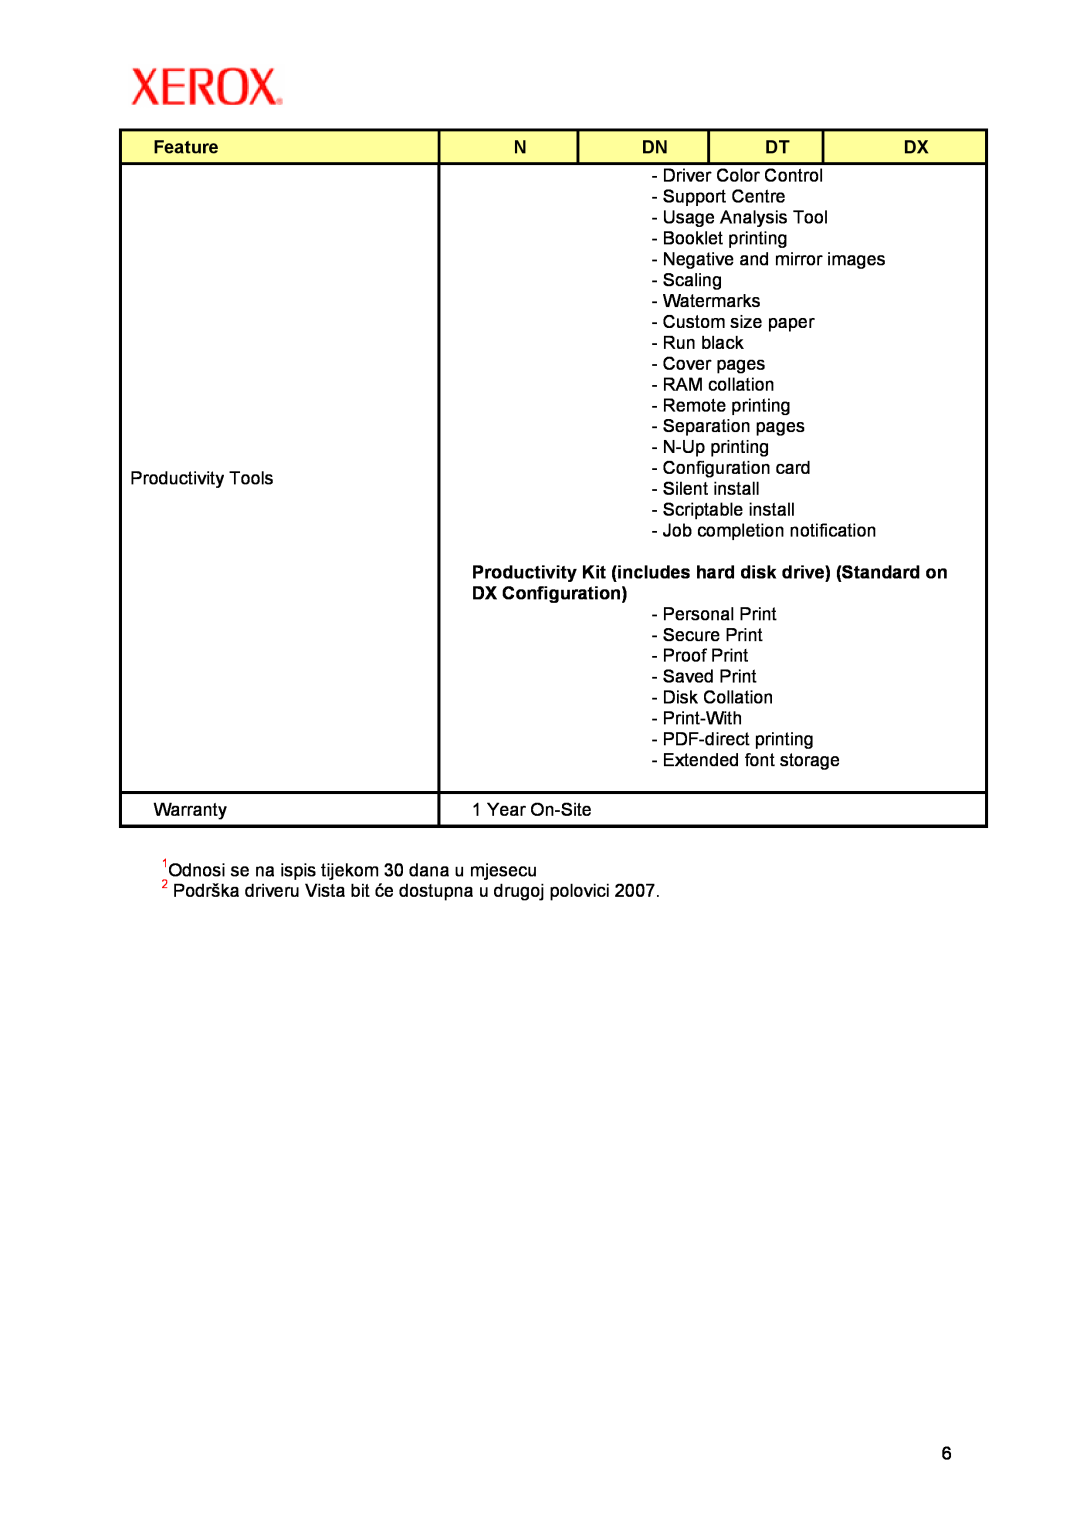 Xerox P5/ 2007 manual Feature, DX Configuration 